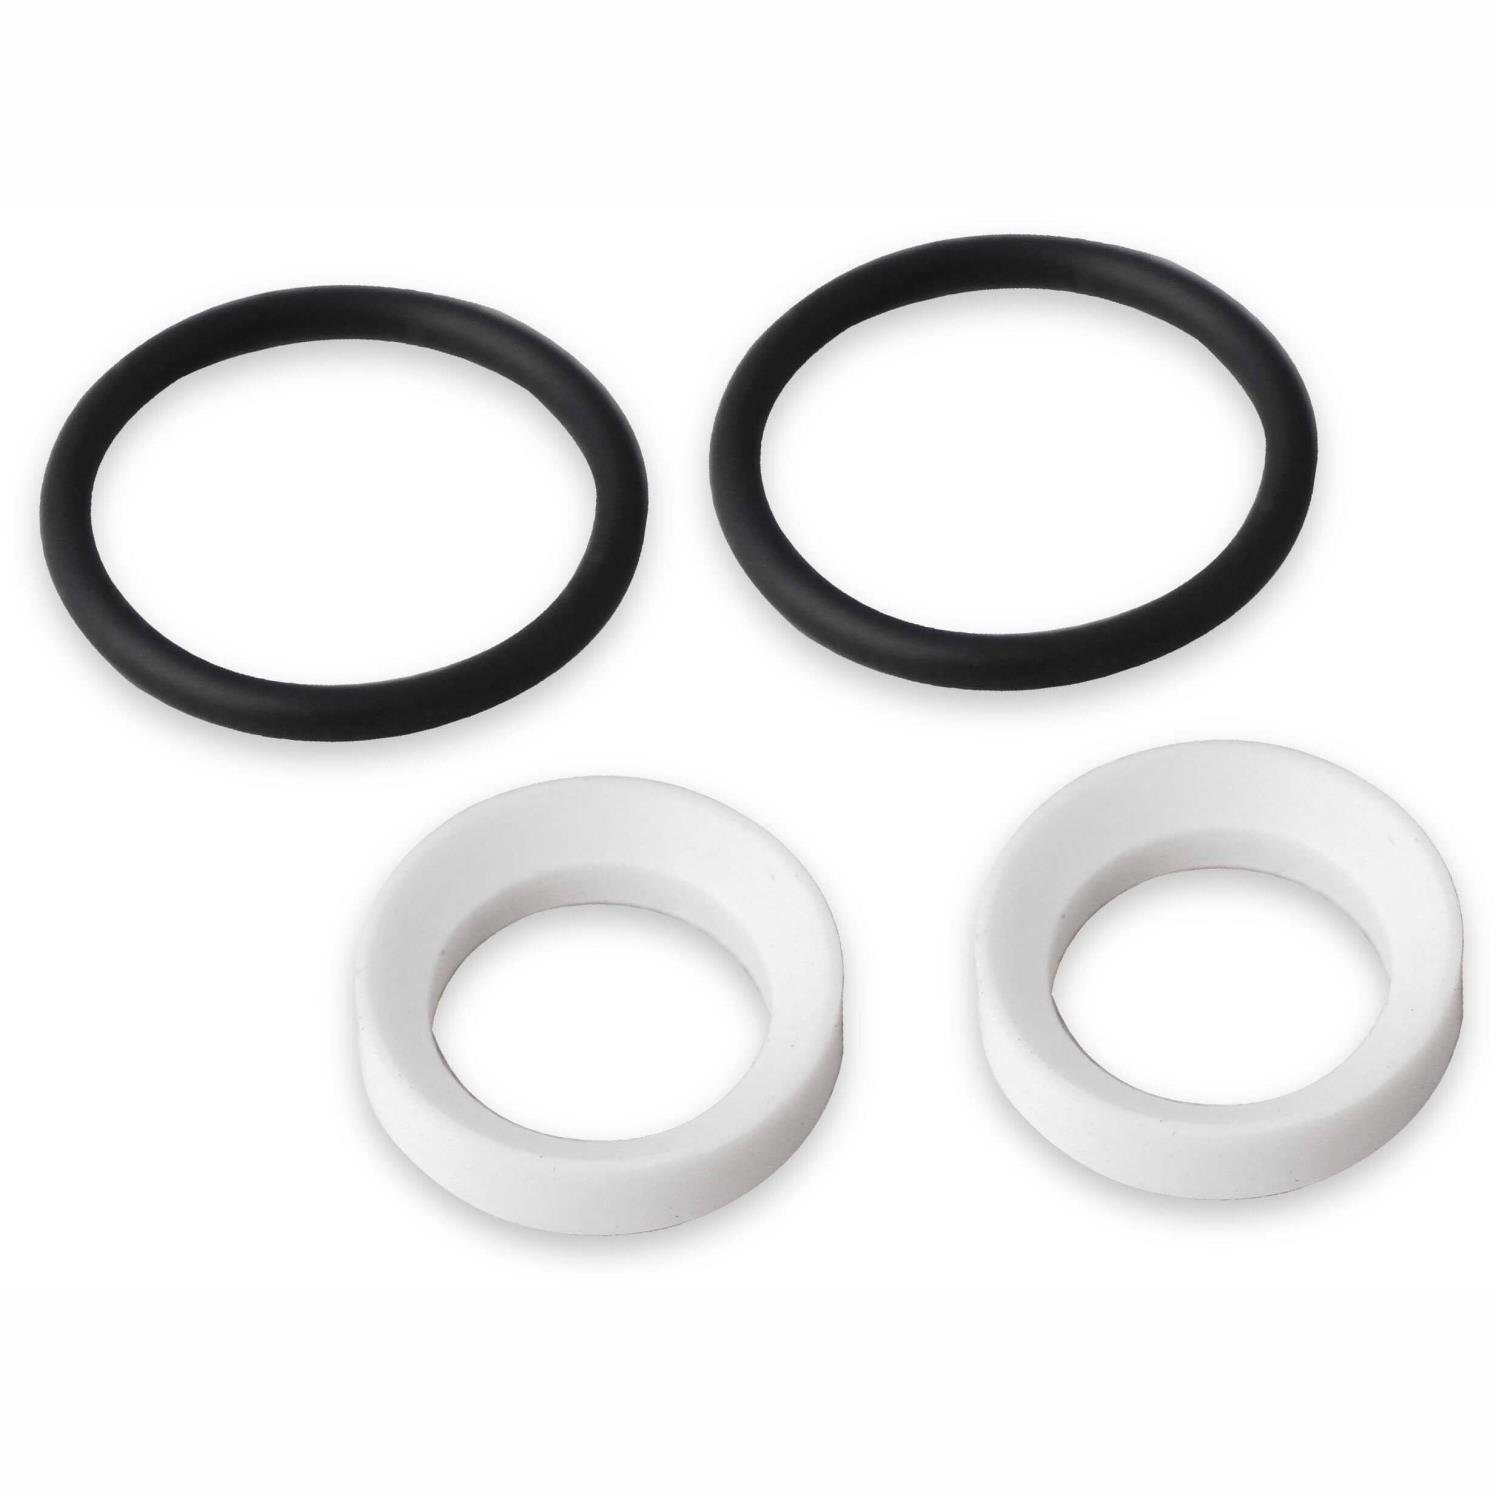 UltraPro Ball Valve Replacement Seal Kit